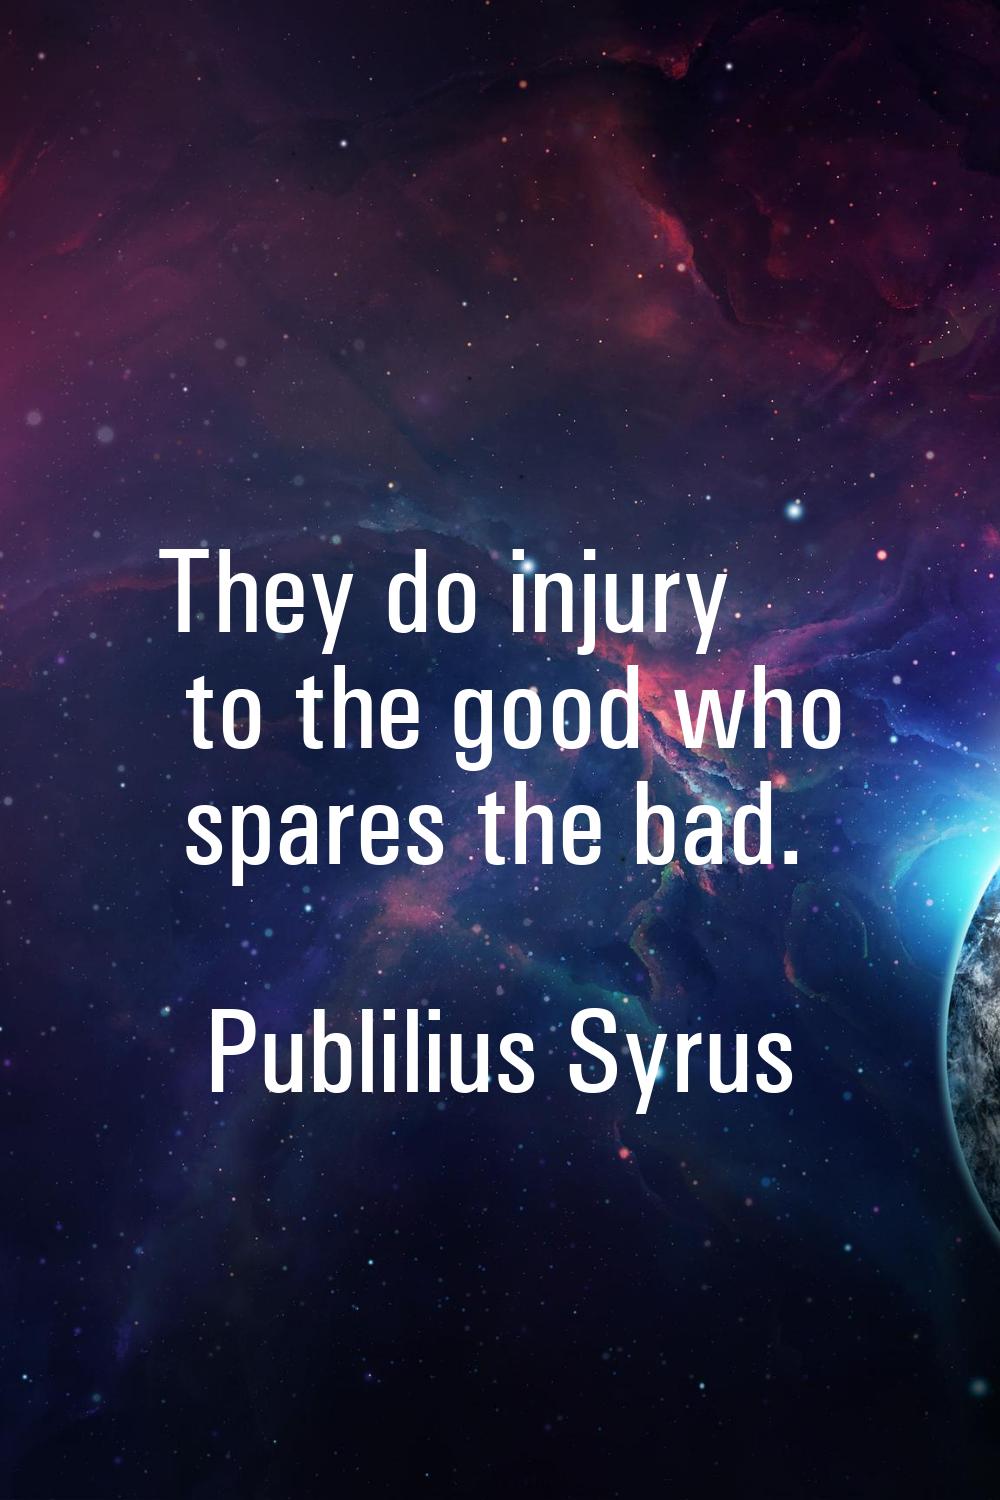 They do injury to the good who spares the bad.